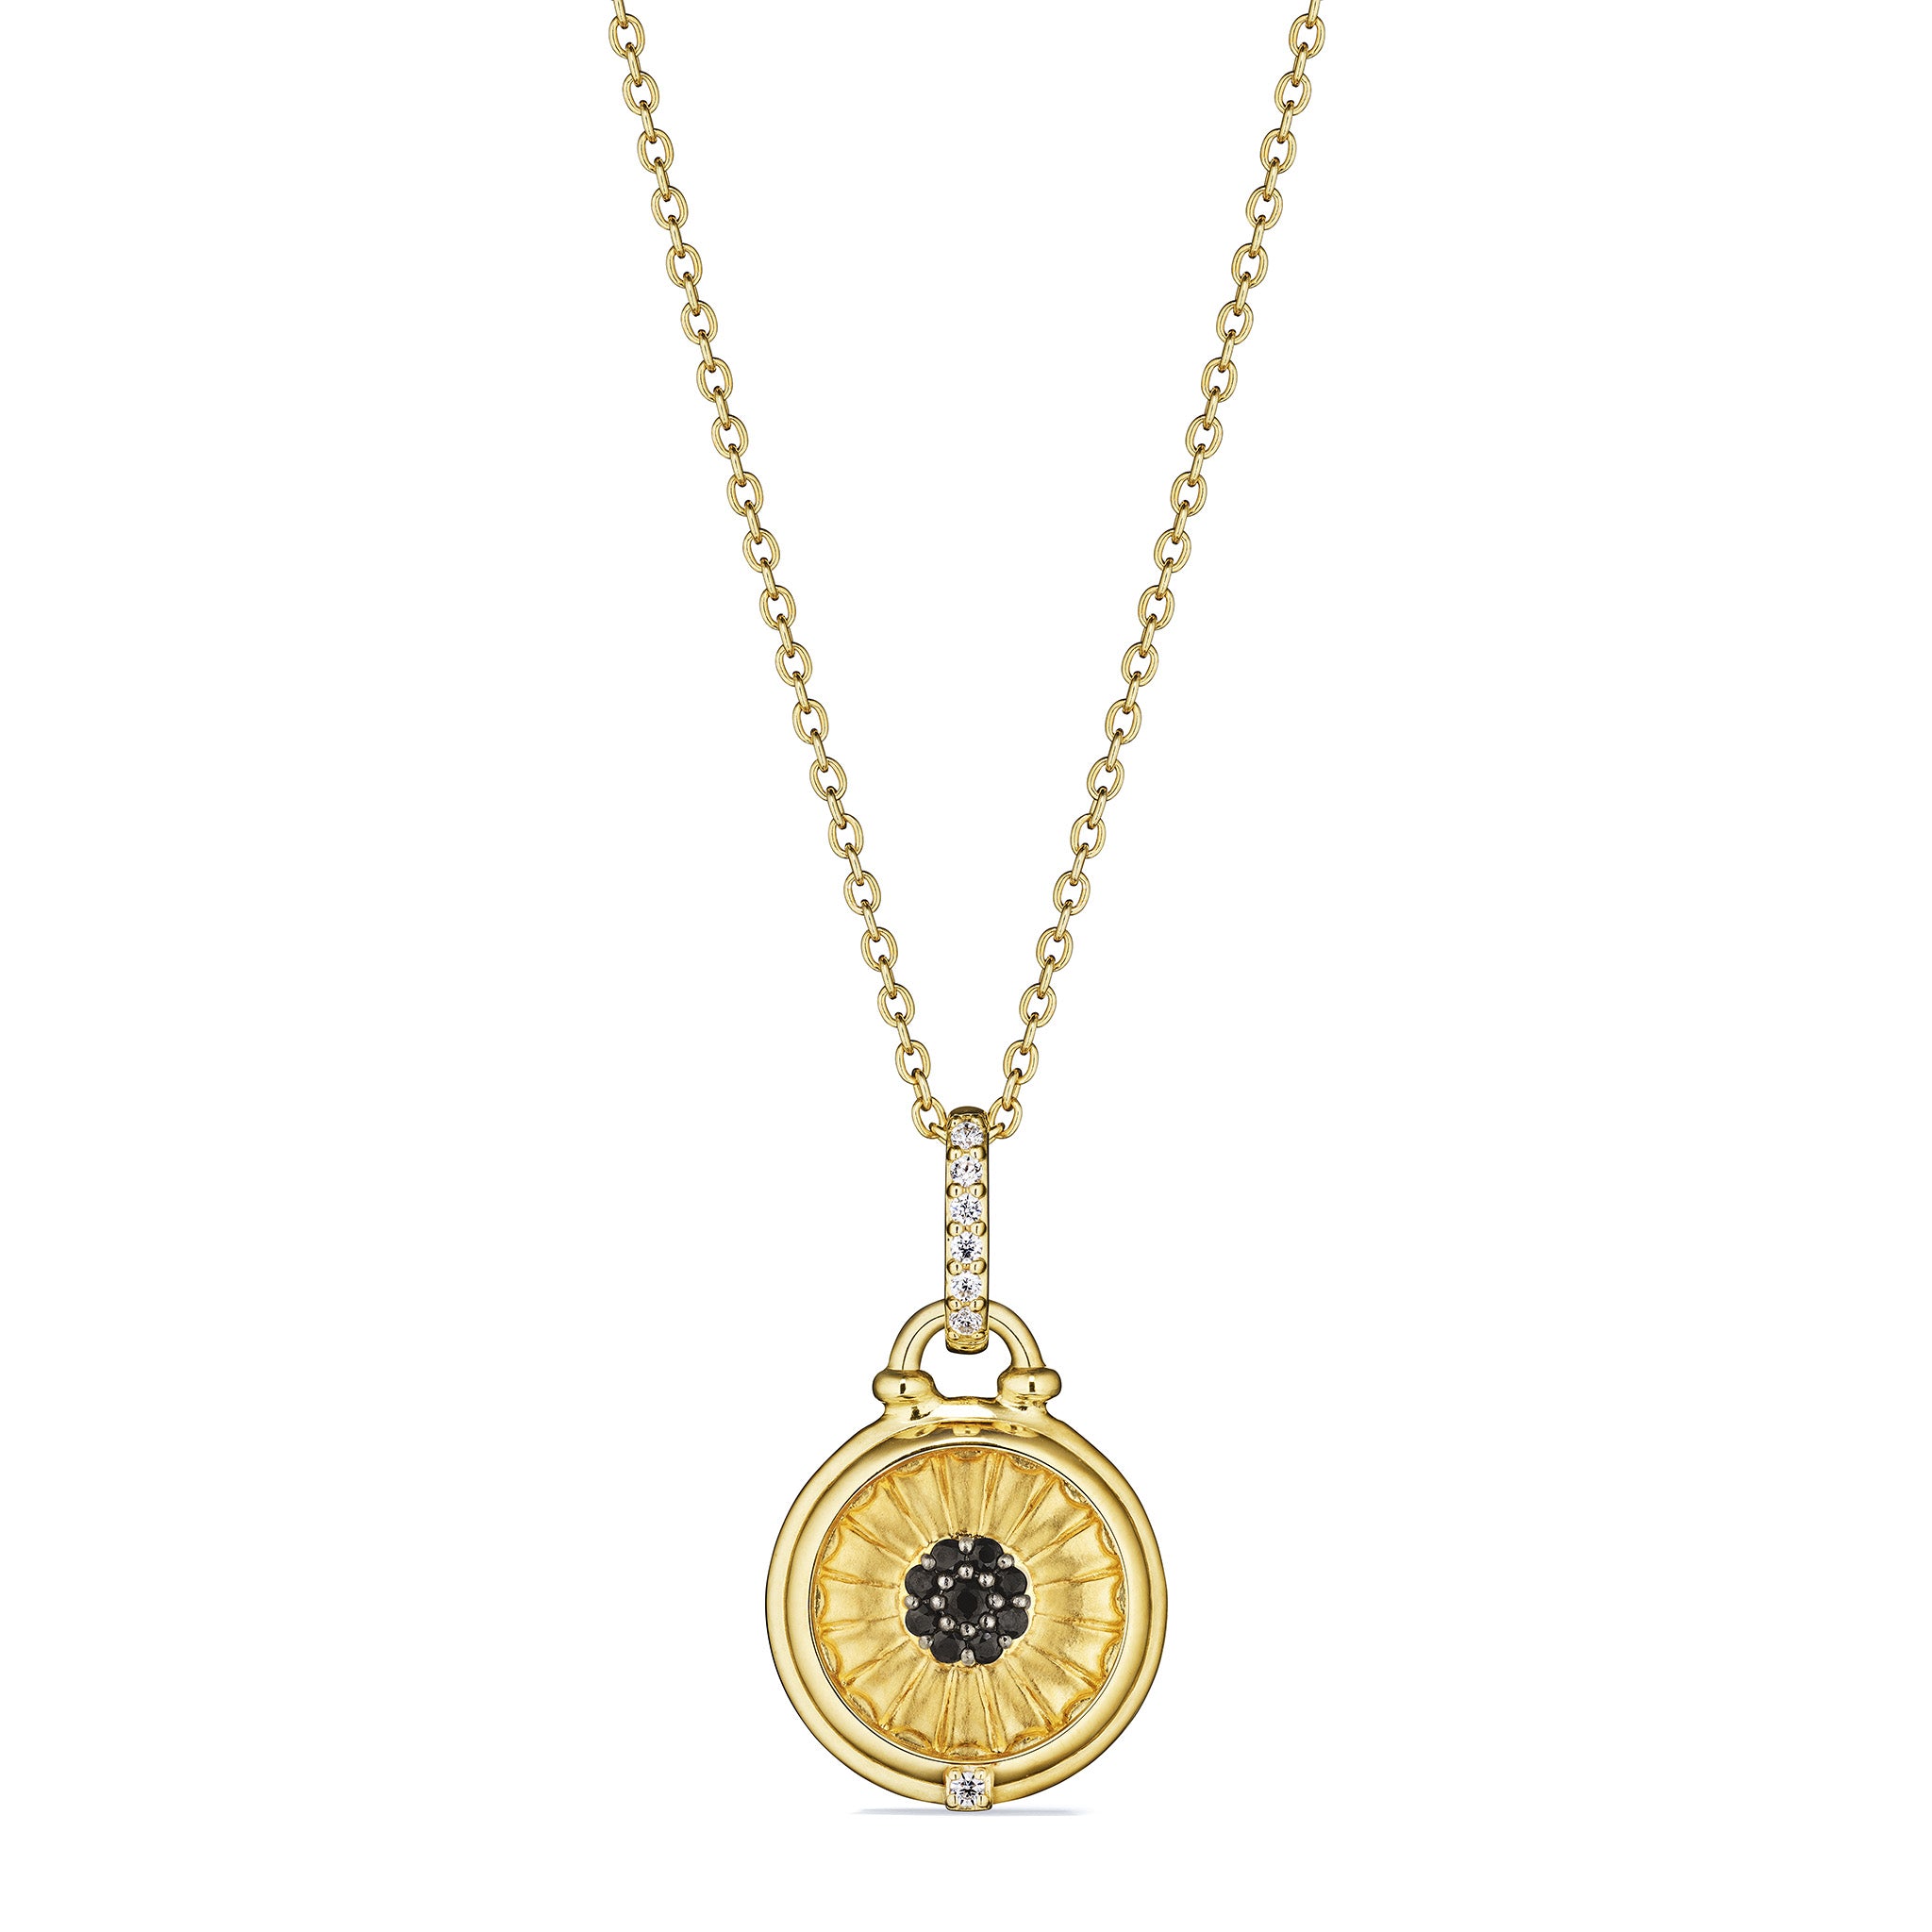 Little Luxuries Sunflower Medallion Necklace with Black Spinel and Diamonds in 18K